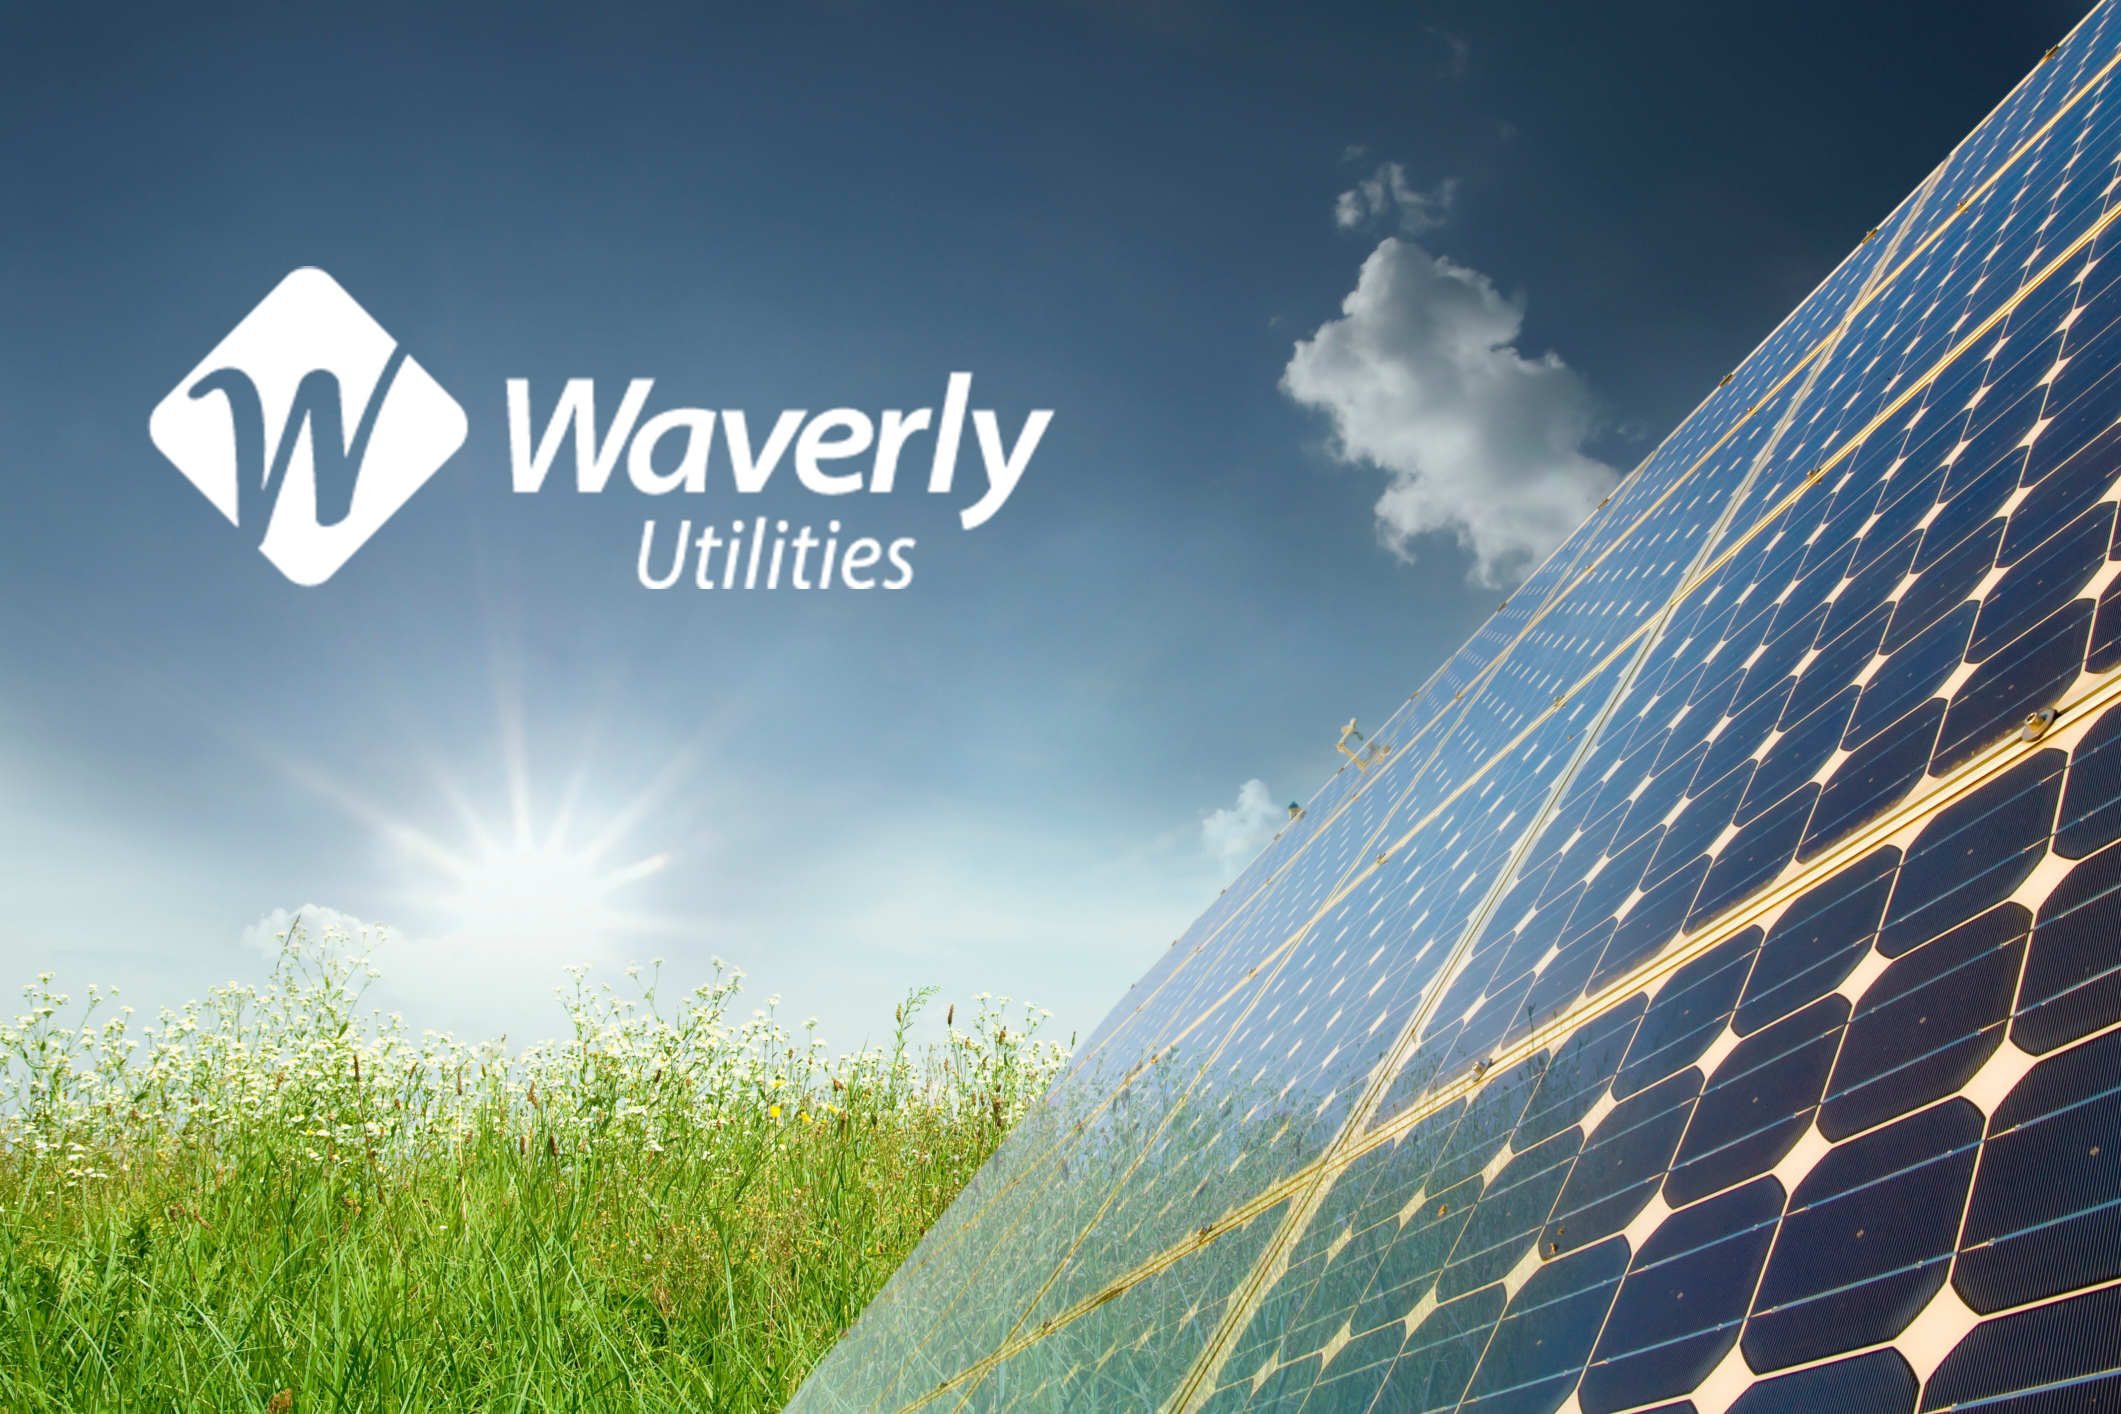 SOLAR IS COMING TO WAVERLY UTILITIES